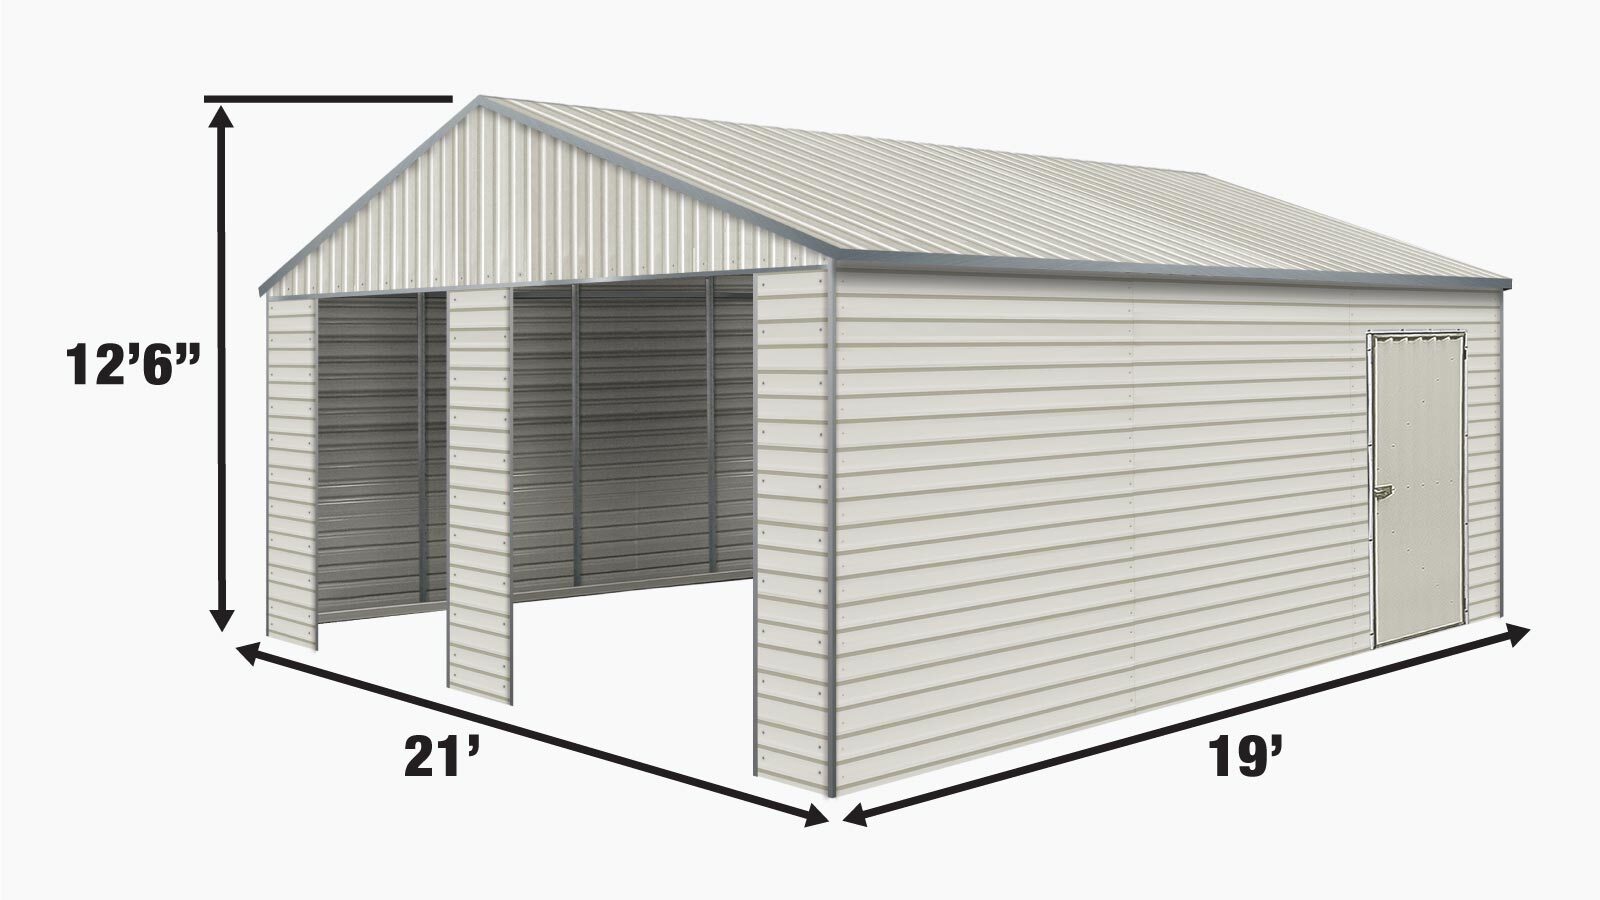 TMG Industrial 21' x 19' Double Garage Metal Shed with Side Entry